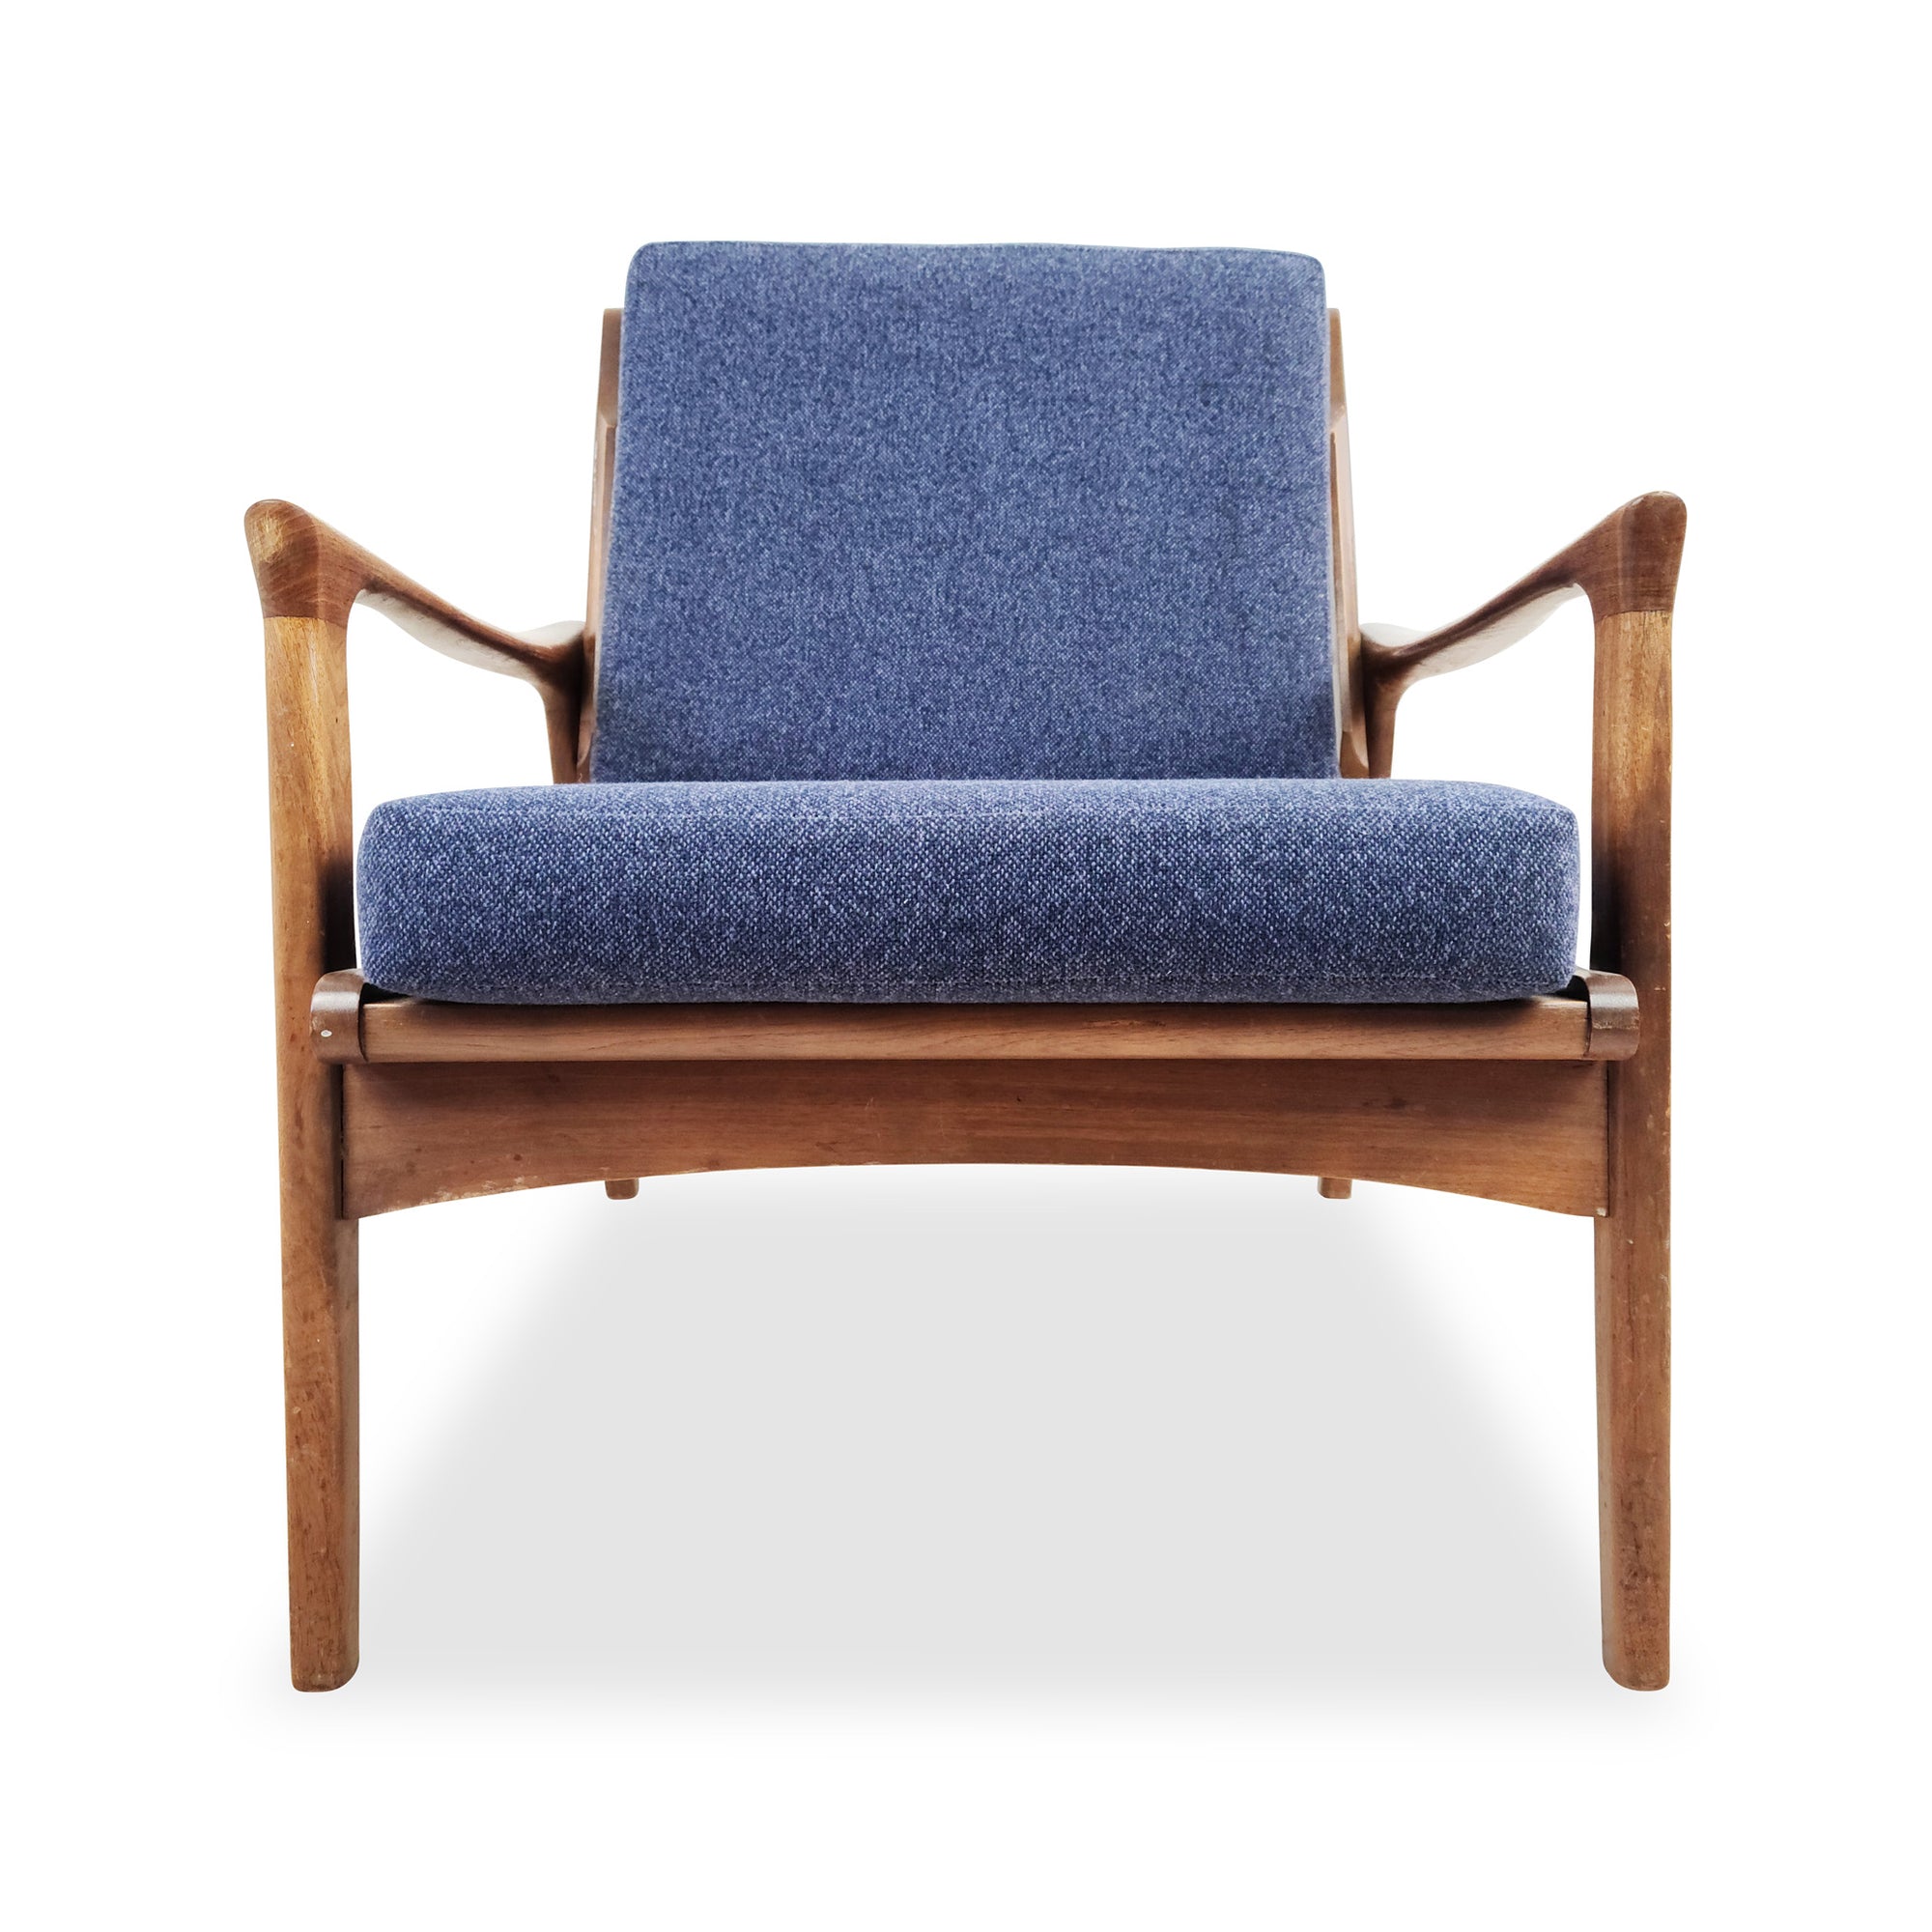 Walnut Lounge Chair by Paramount of Montreal